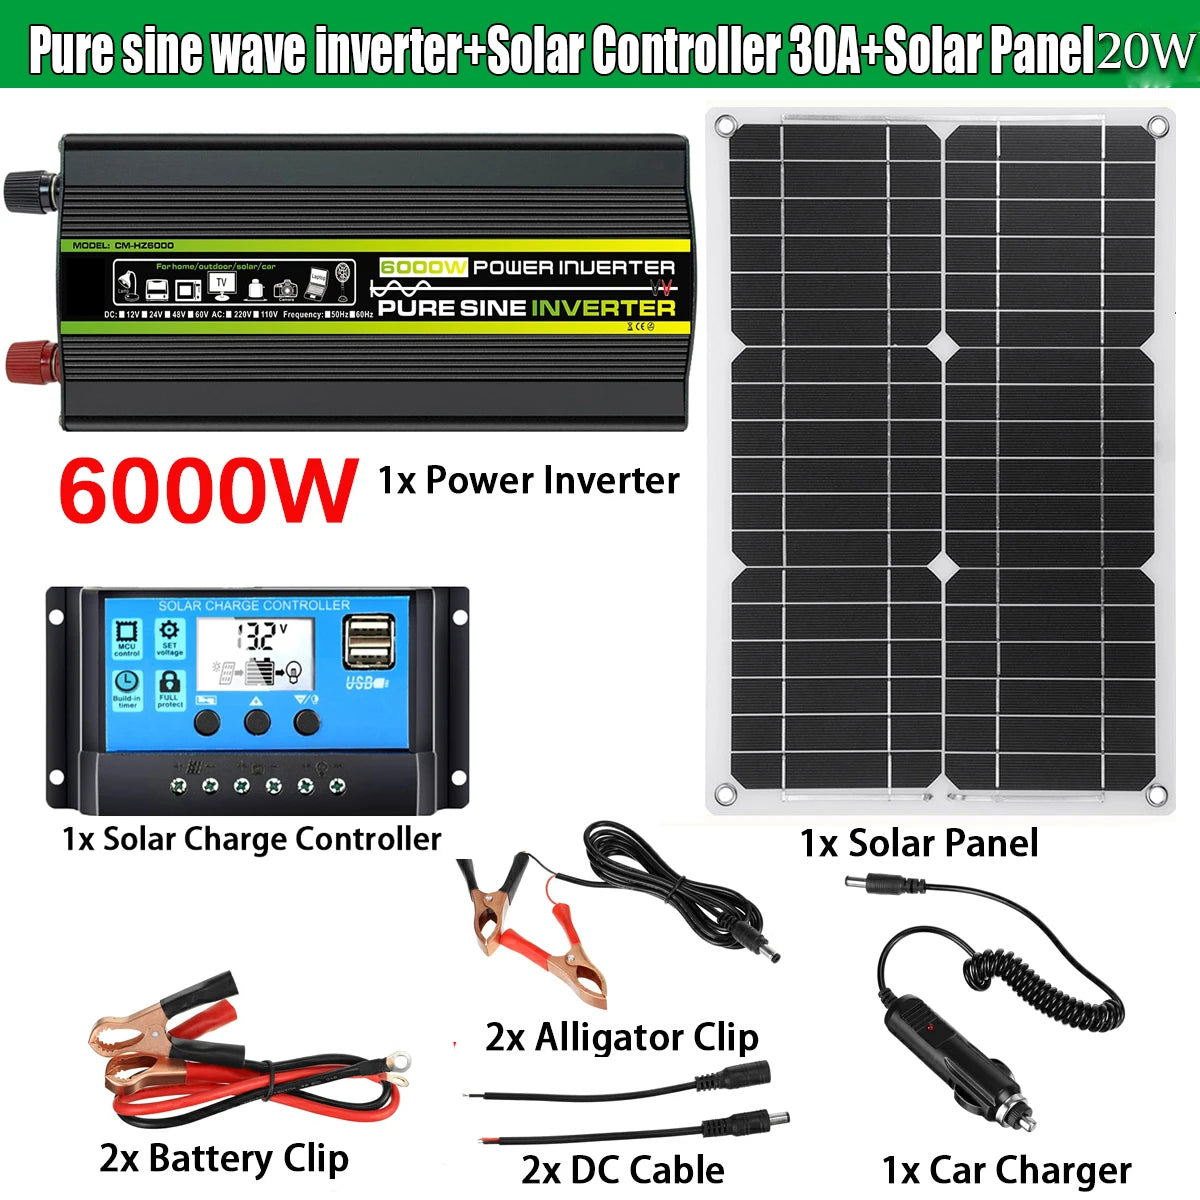 3000W/4000W/6000W Pure Sine Wave Inverter, Portable power kit for cars, yachts, RVs, boats, and phones with pure sine wave inverter, solar controller, and accessories.